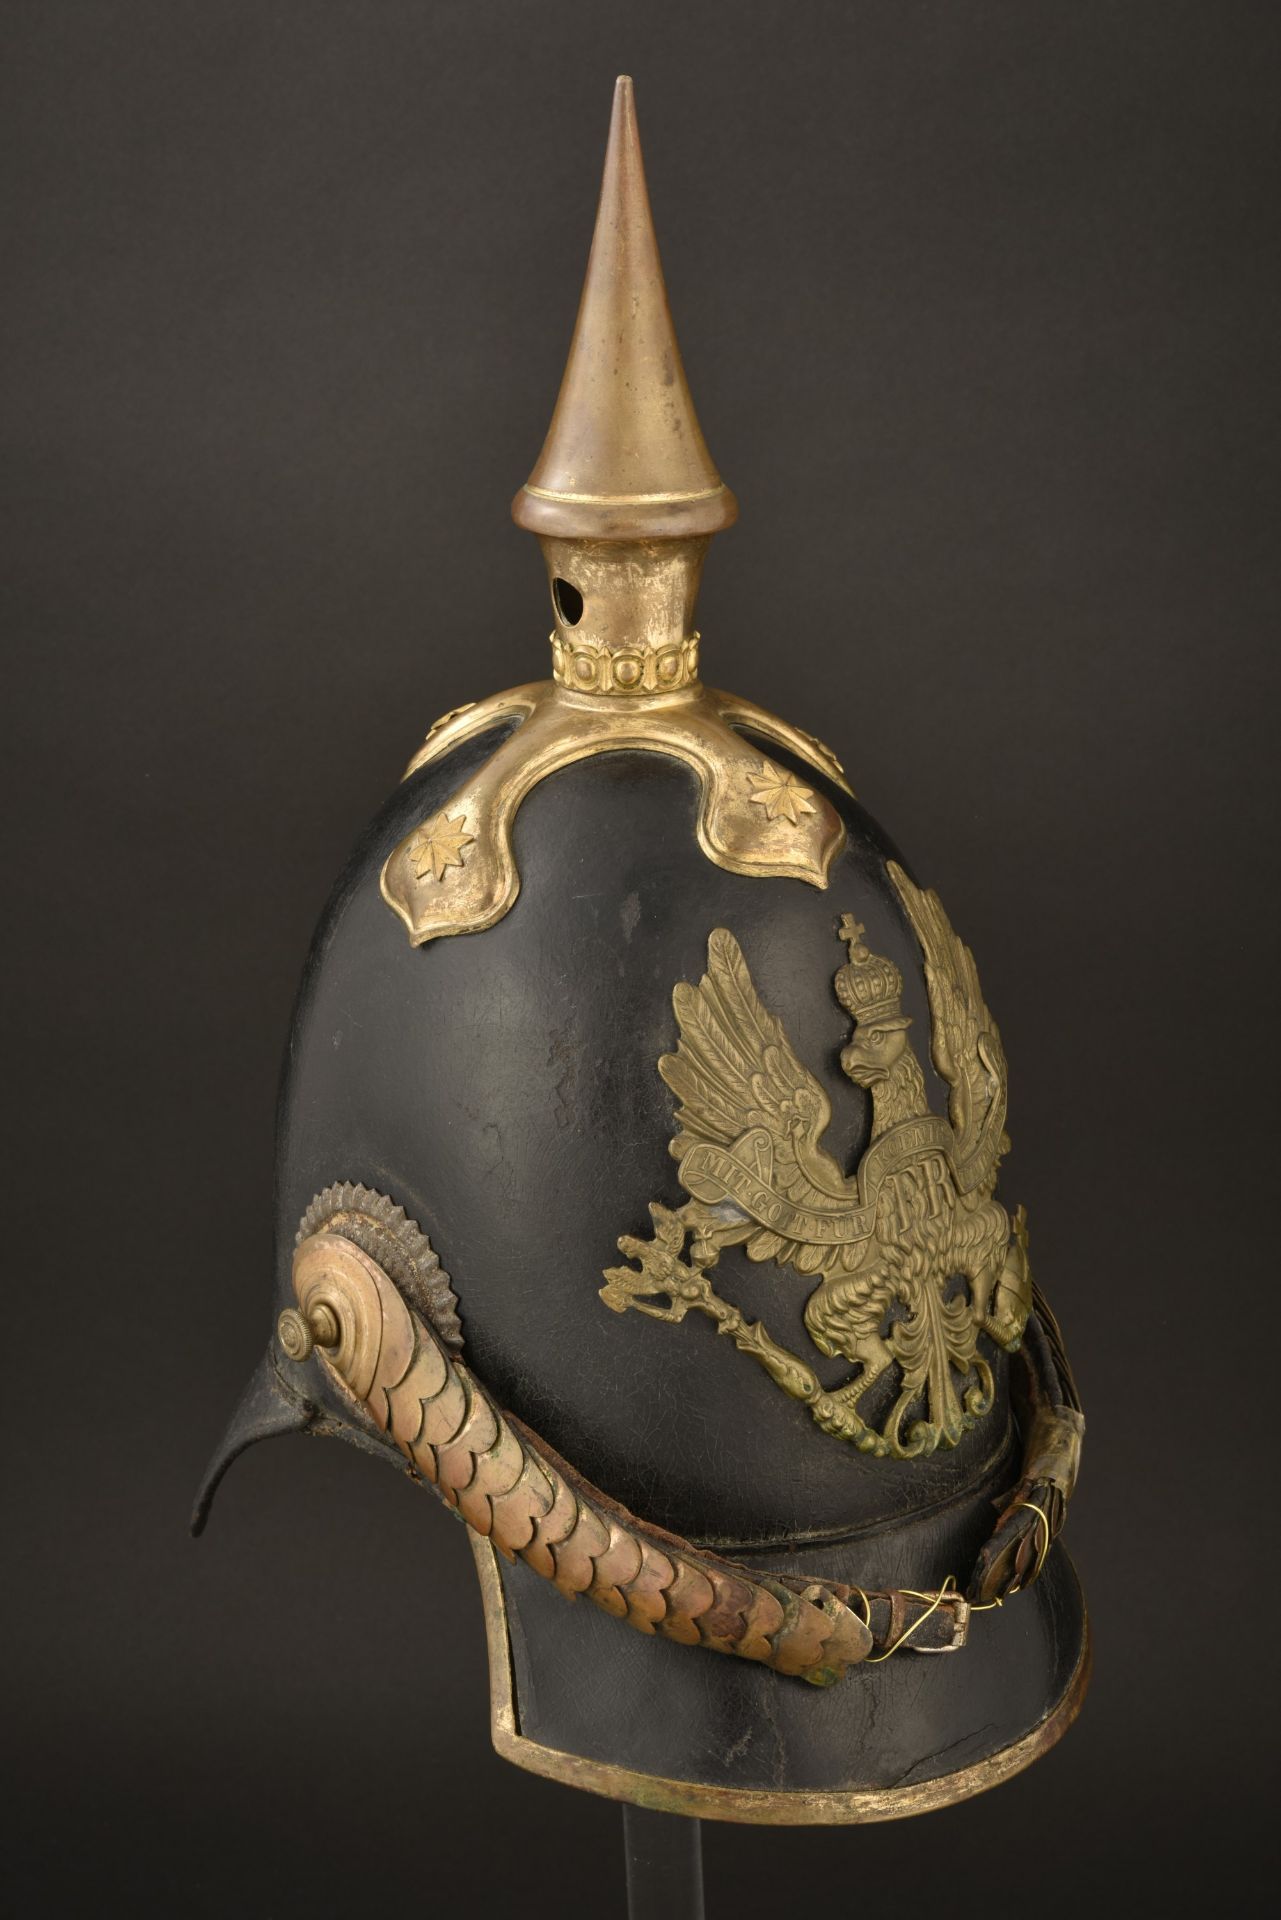 Casque a pointe d officier prussien 1842. Early prussian officer spiked helmet pattern 1842. Offizie